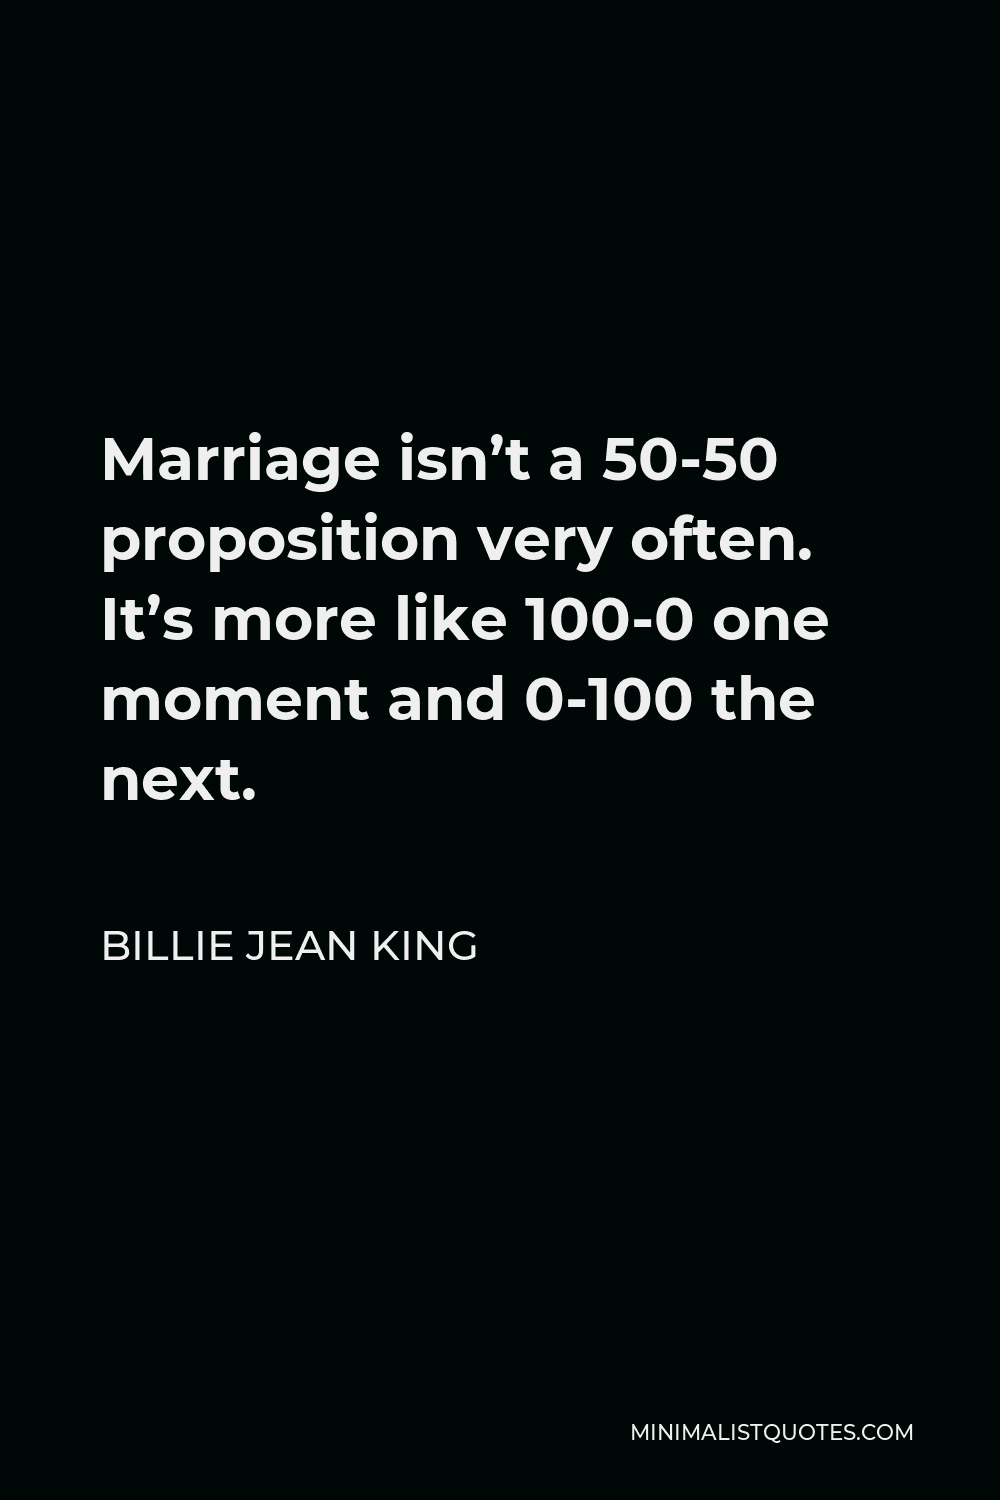 Billie Jean King Quote - Marriage isn’t a 50-50 proposition very often. It’s more like 100-0 one moment and 0-100 the next.